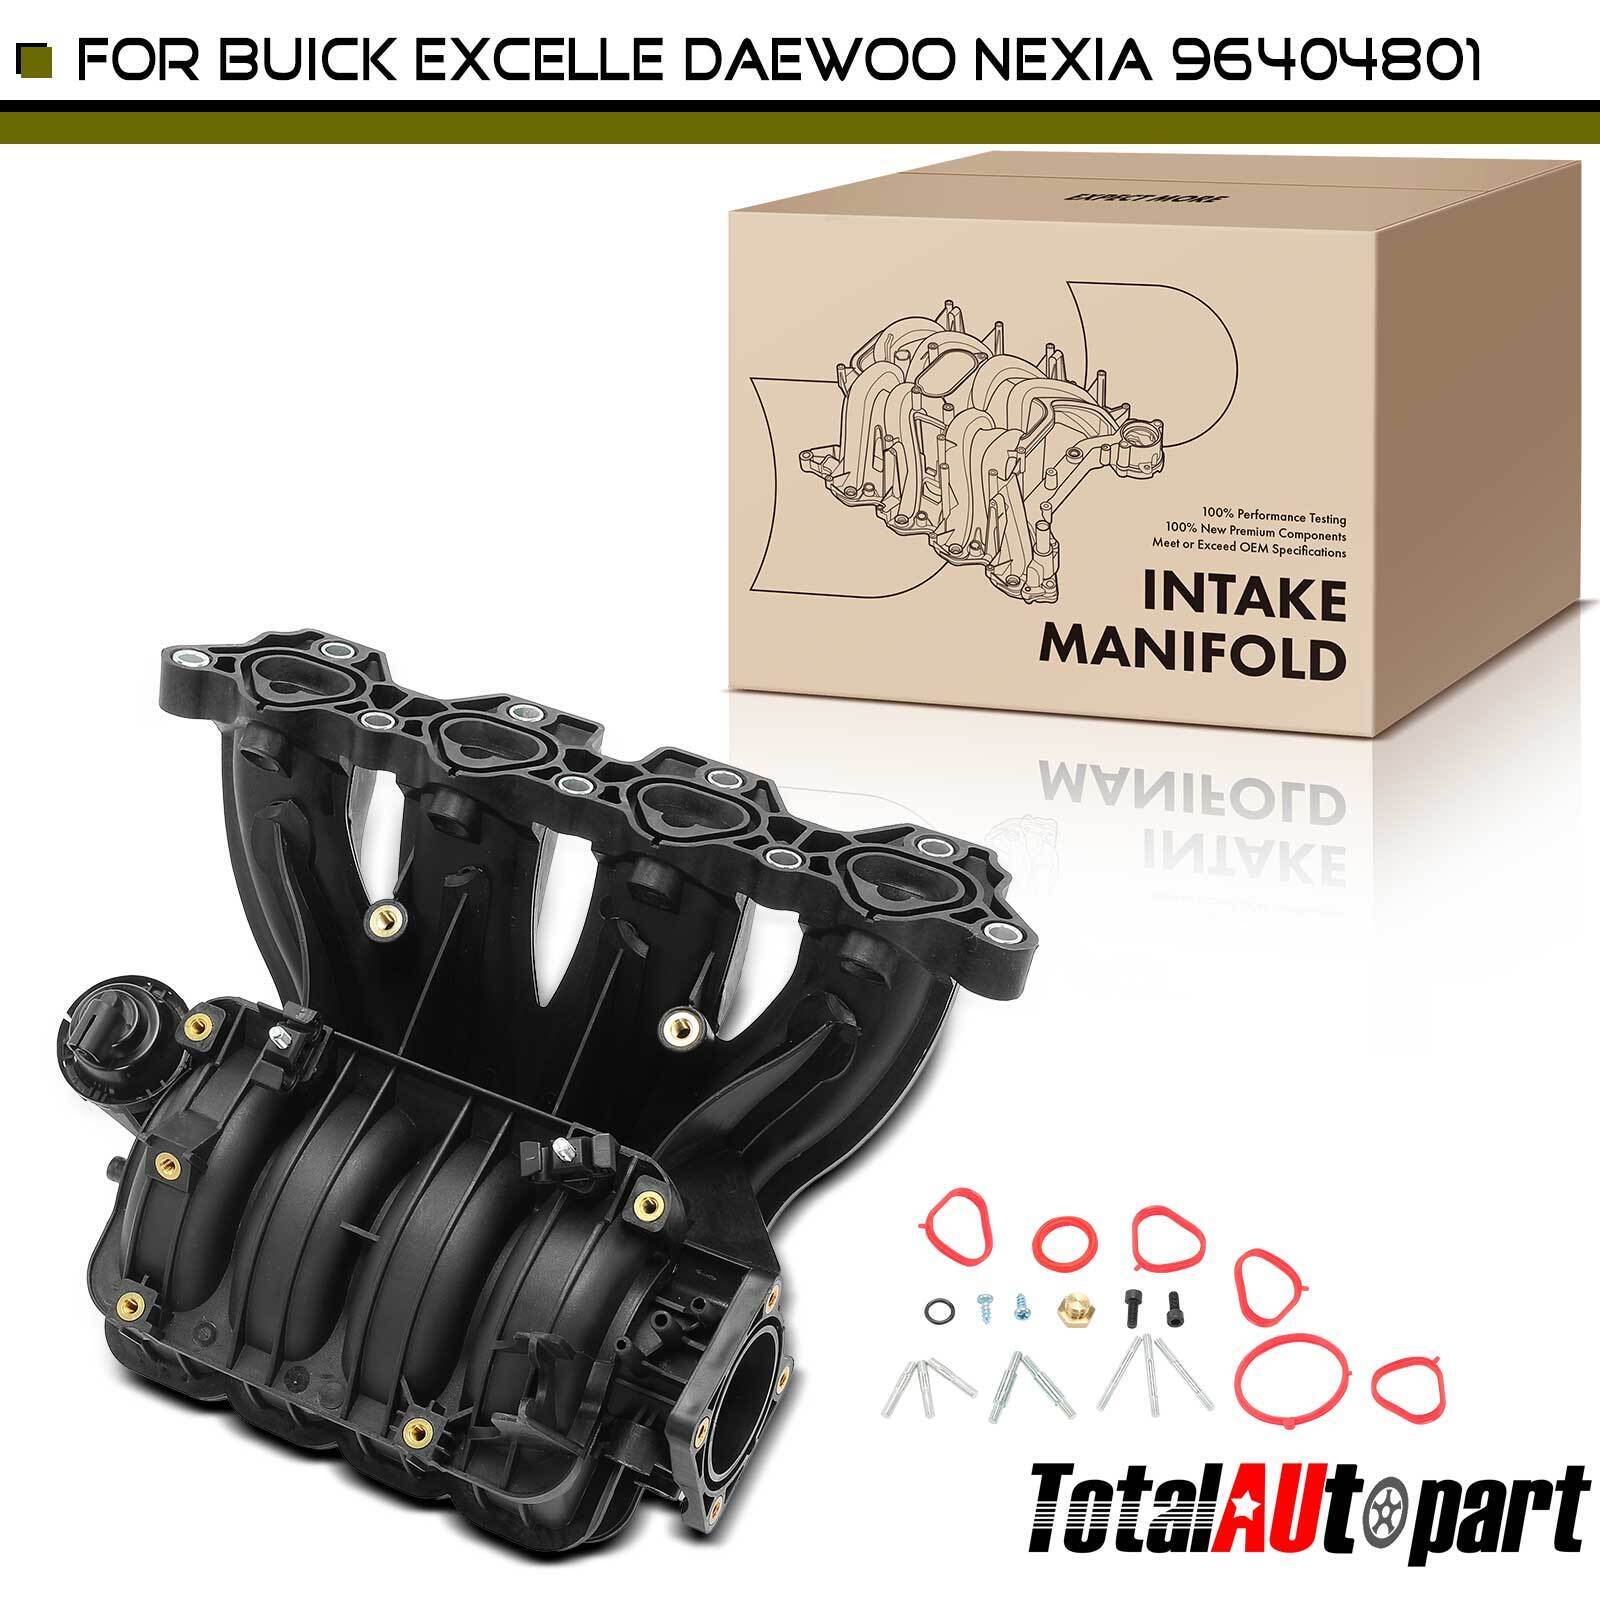 New Engine Inlet Intake Manifold Assembly for Buick Excelle Daewoo Nexia Black